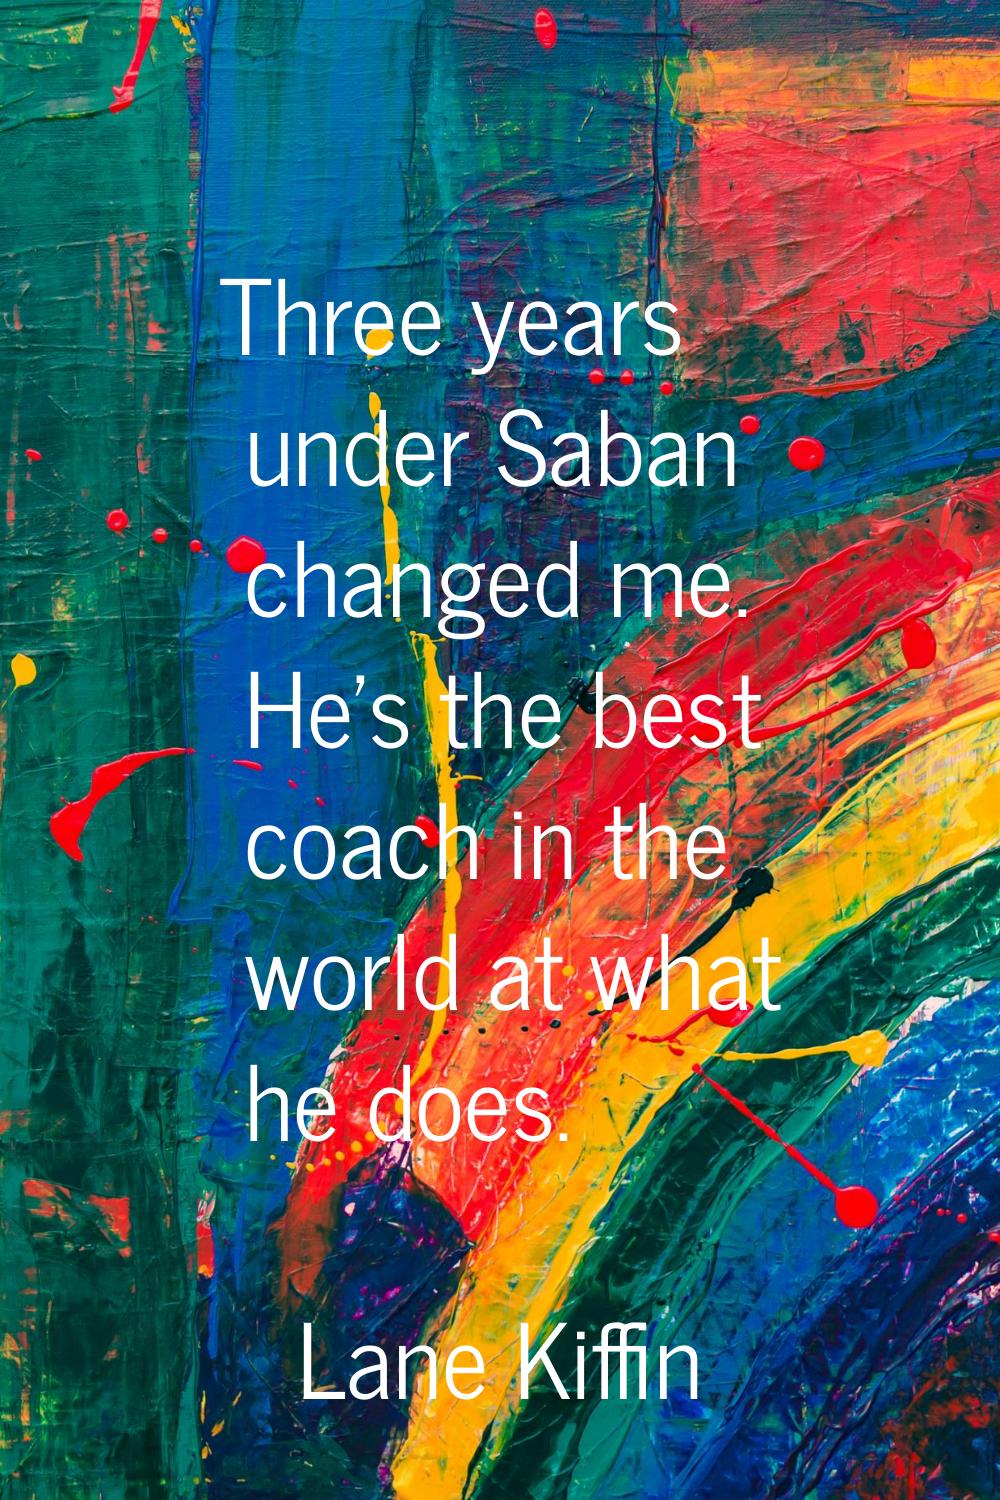 Three years under Saban changed me. He's the best coach in the world at what he does.